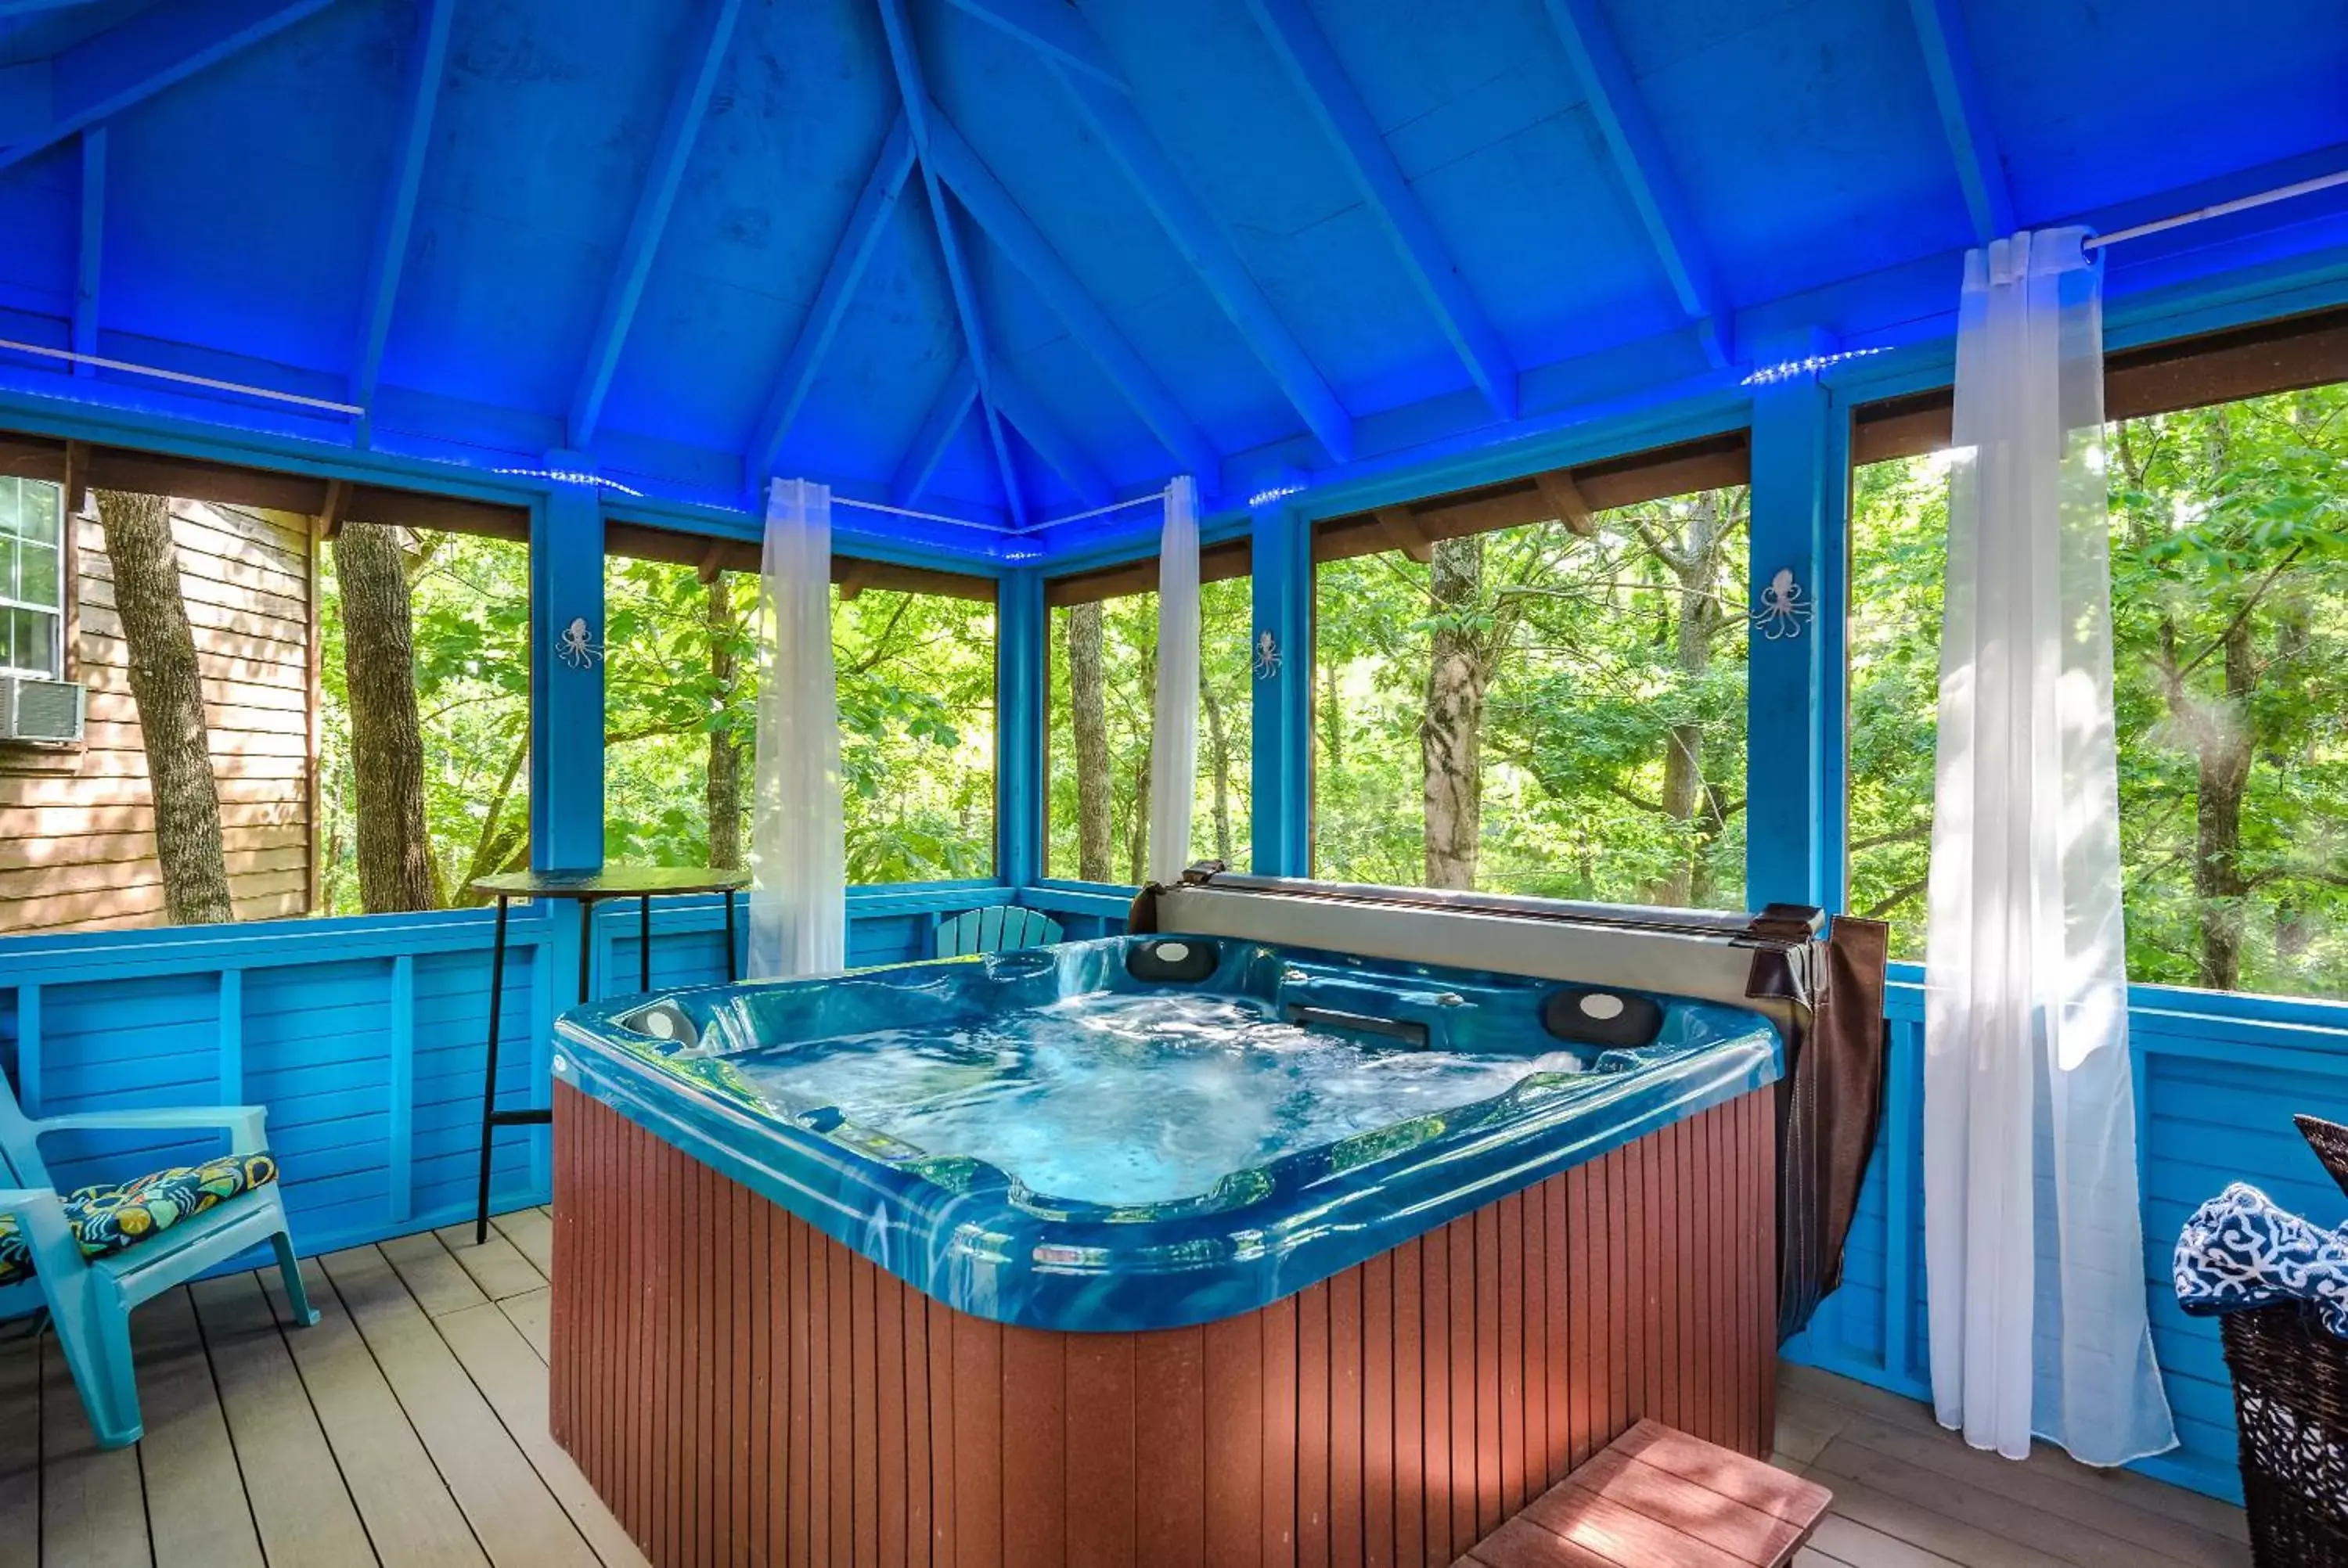 Hot Tub in The Woods Cabins